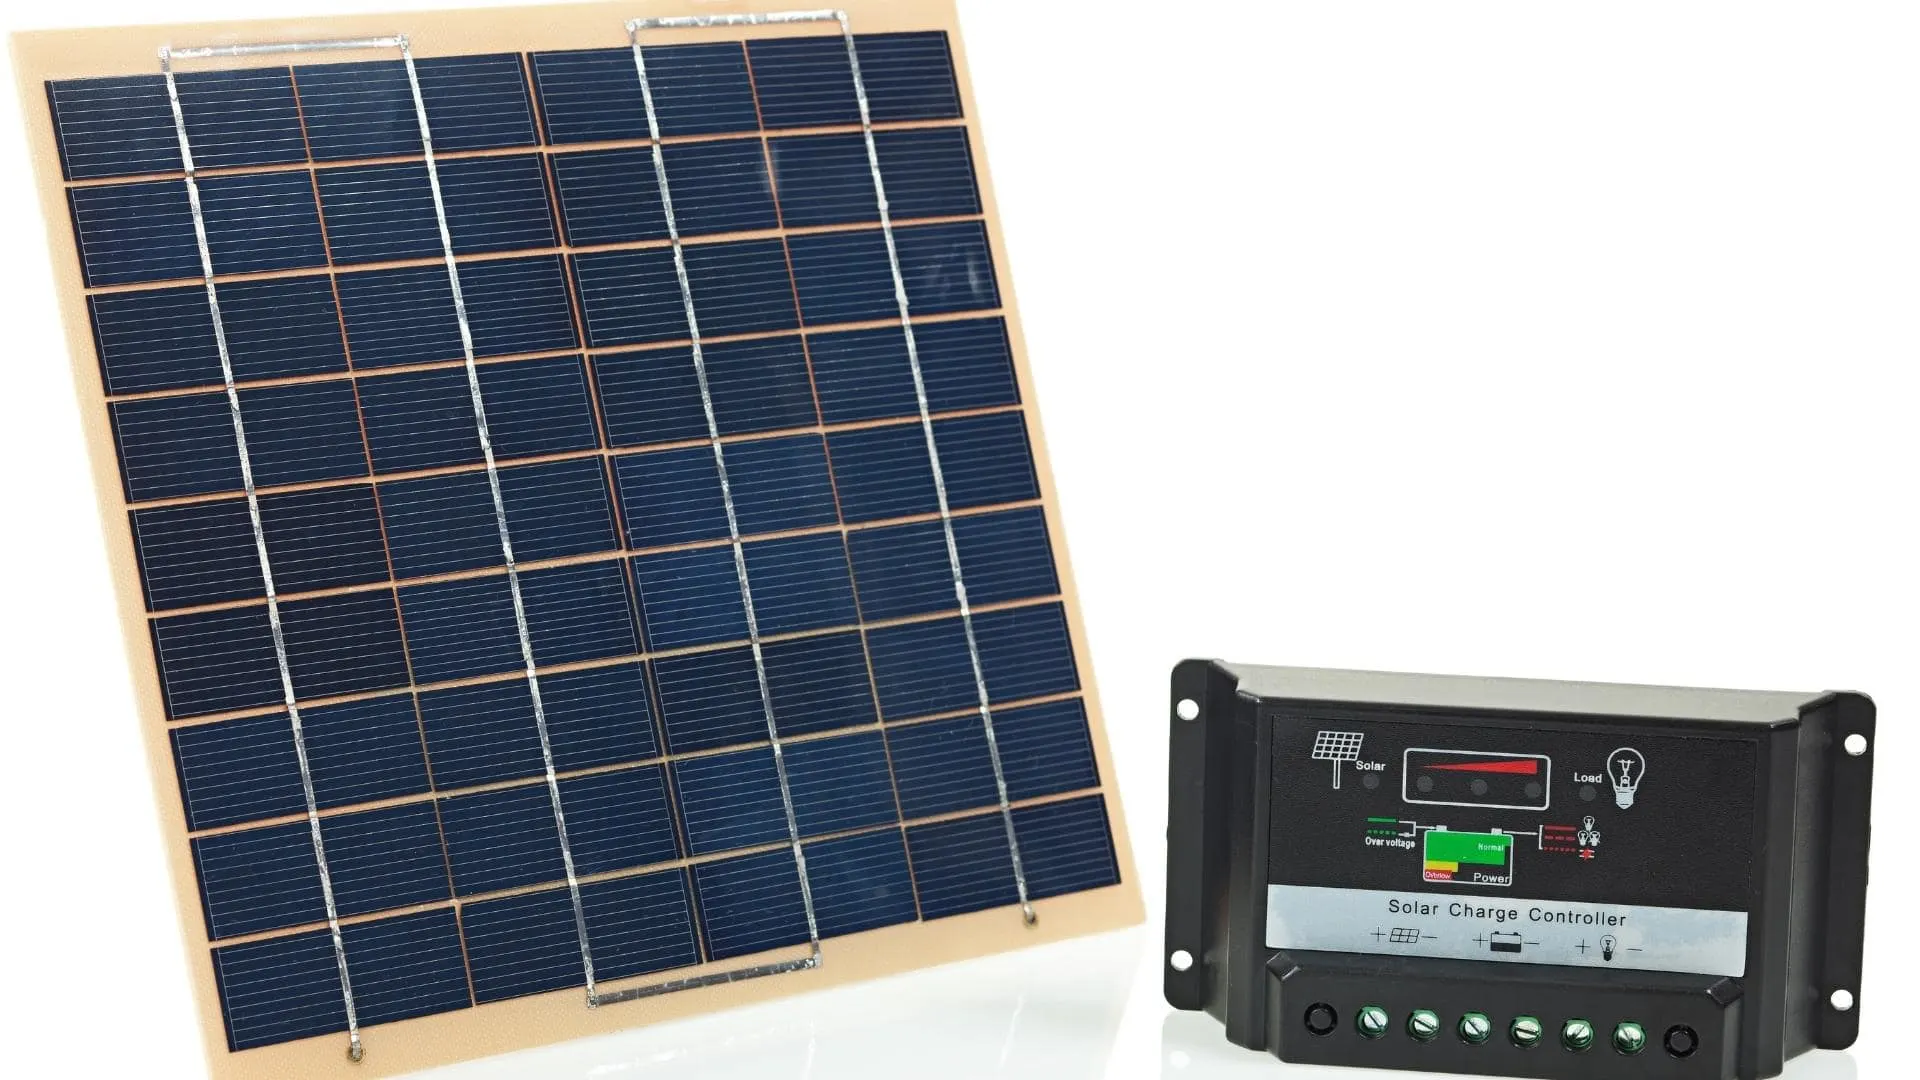 Photo of a solar panel and a solar charge controller